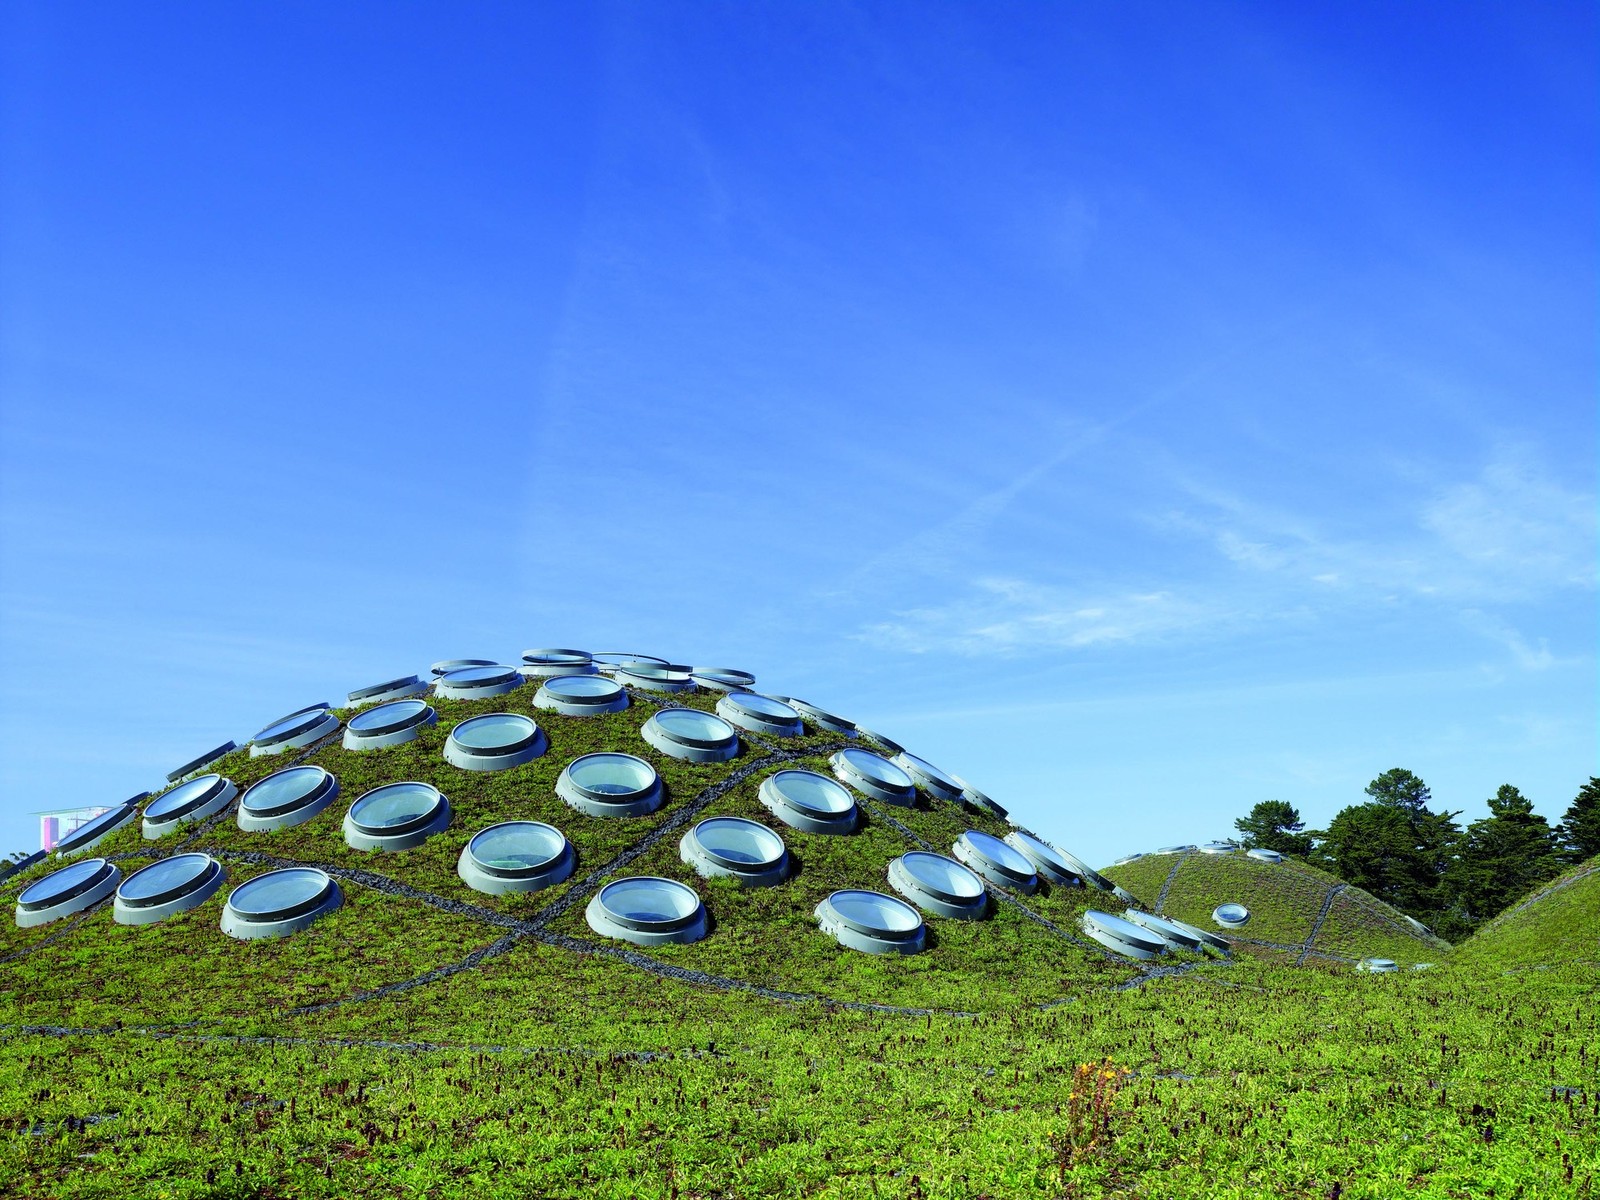 The domed green roof of California Academy of Sciences by Renzo Piano. Photography by Tim Griffith.